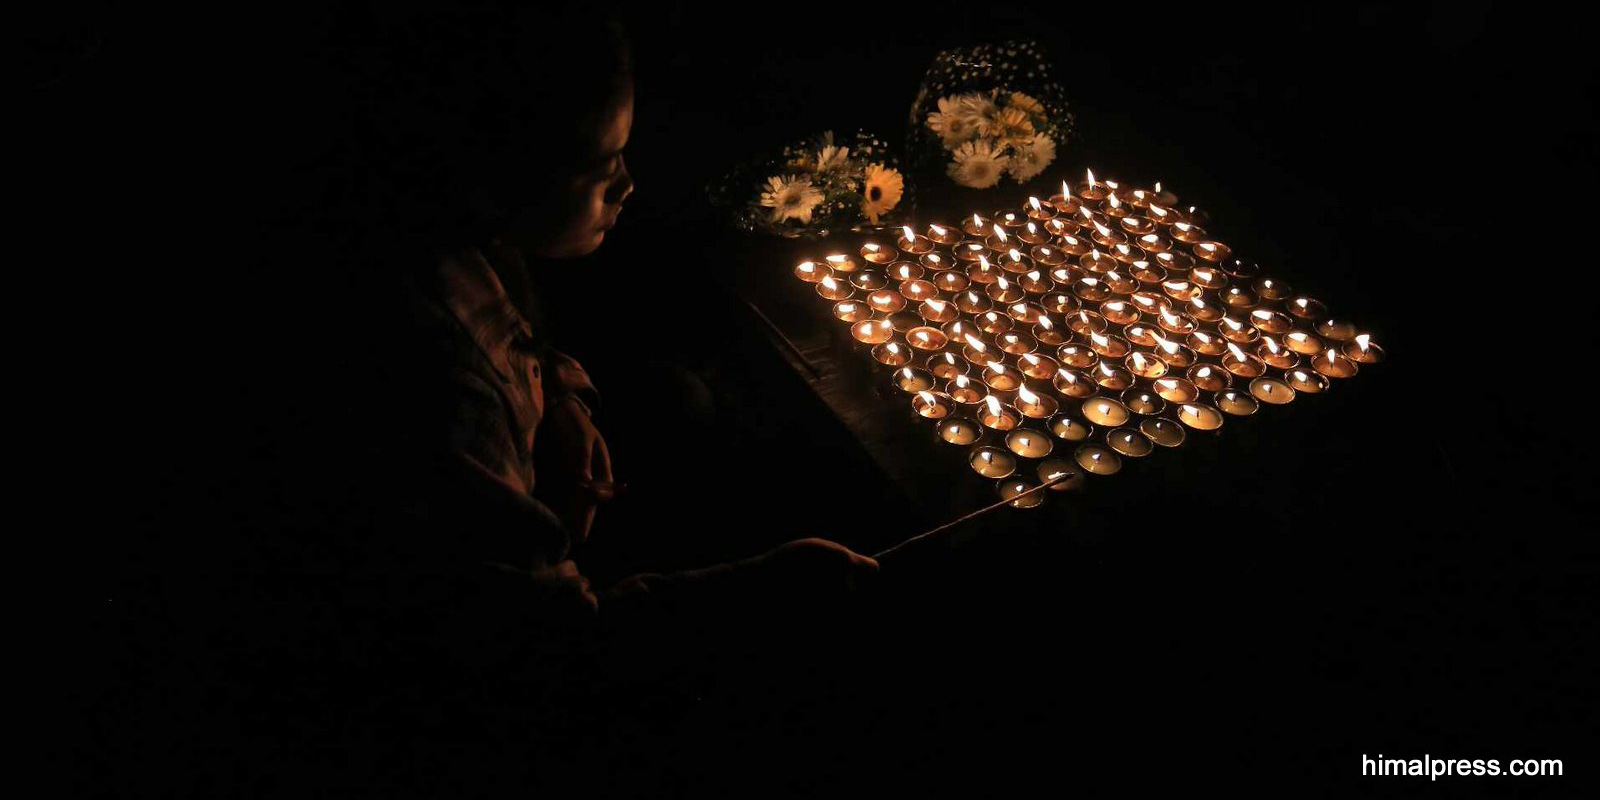 Butter lamps lit in honor of Nepali students killed in Israel [In Pictures]